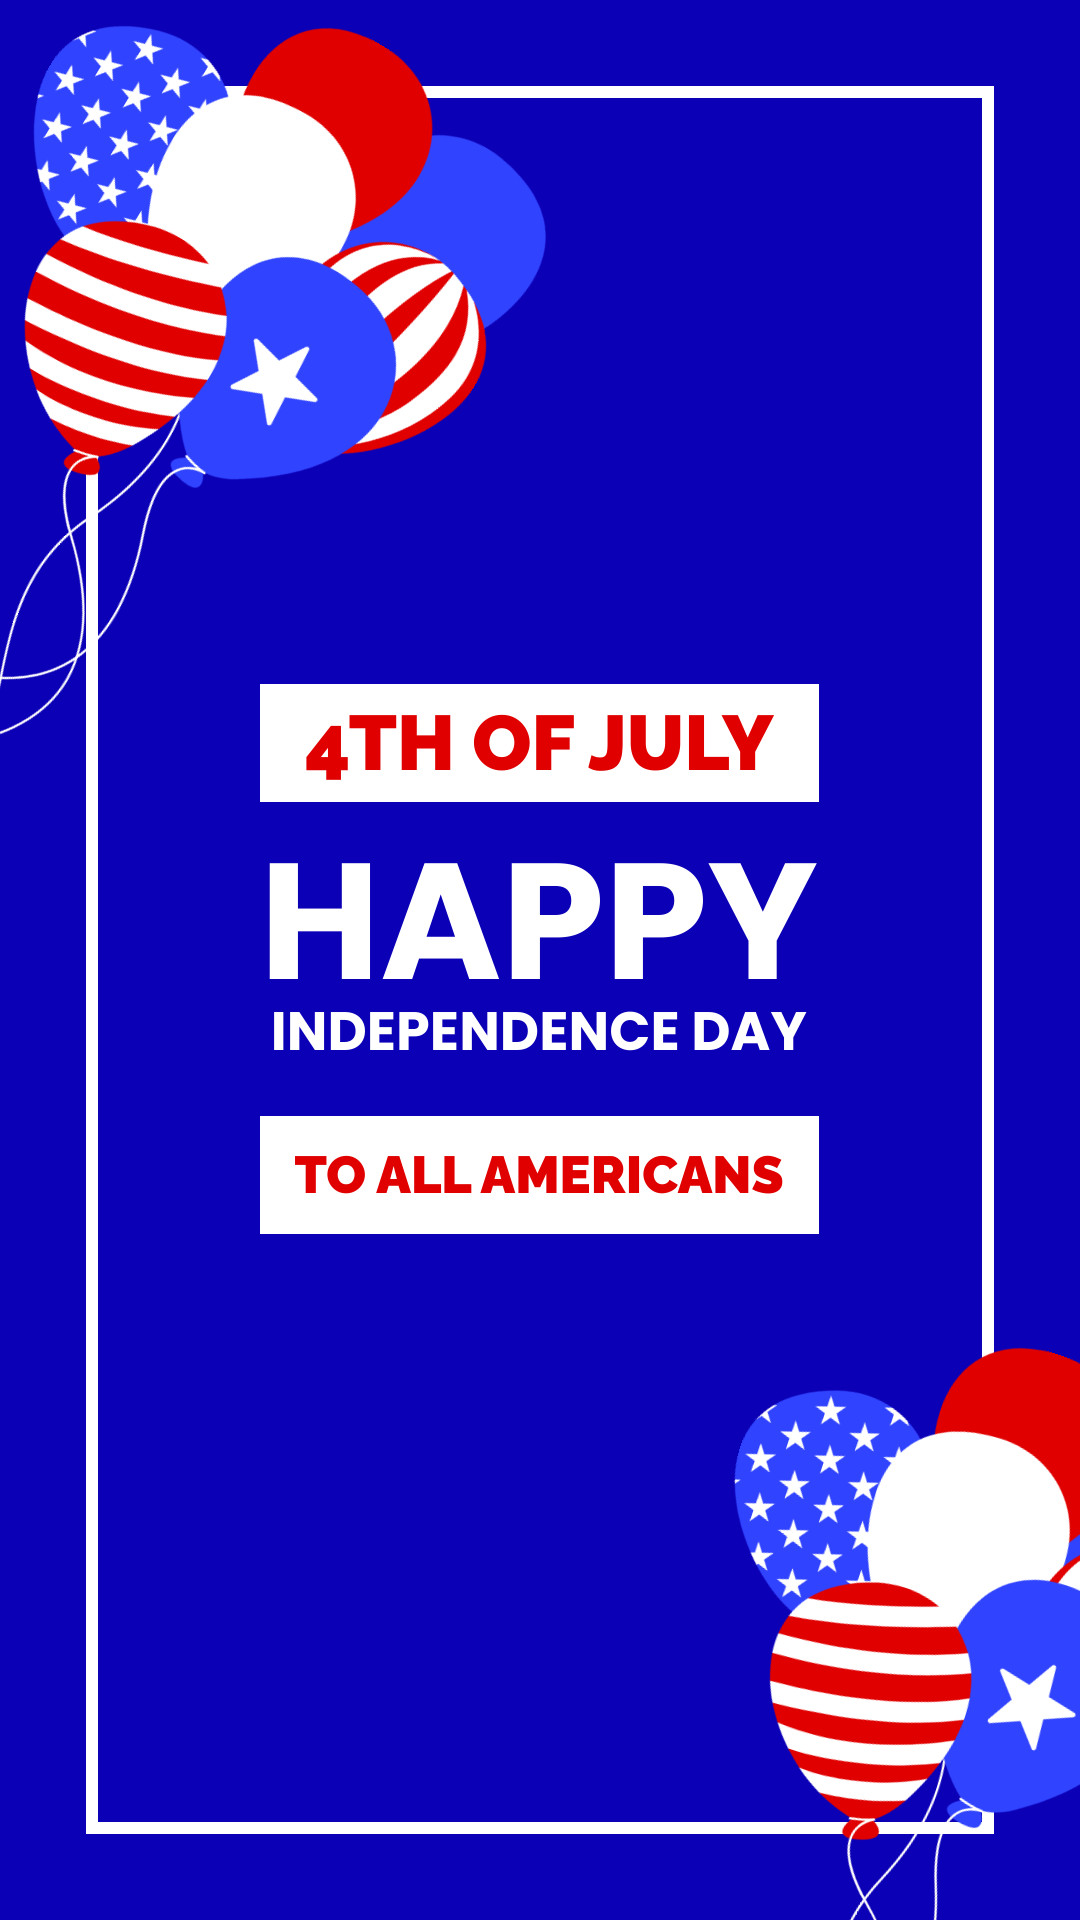 Happy Independence Day to All Americans